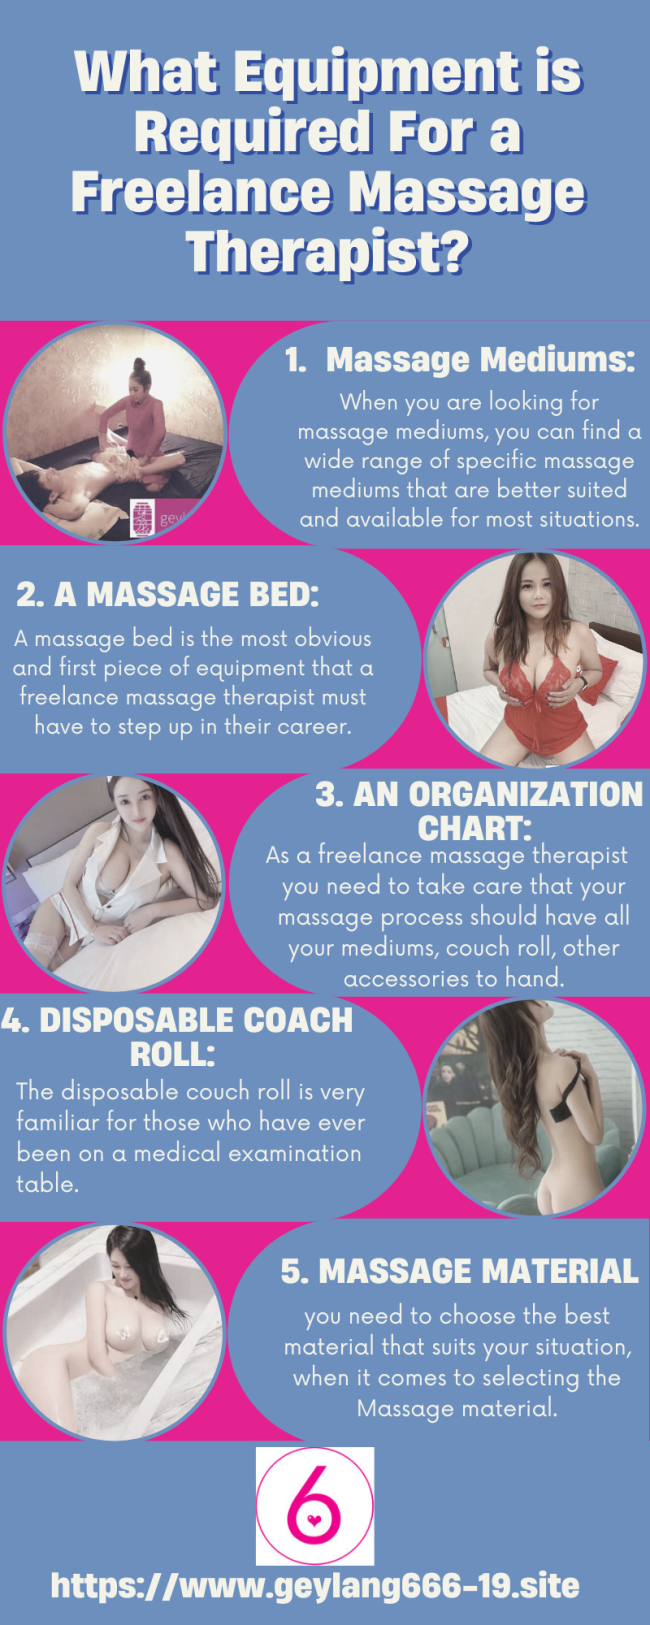 What-Equipment-is-Required-For-A-Freelance-Massage-Therapistd171582b99b34fbf.png